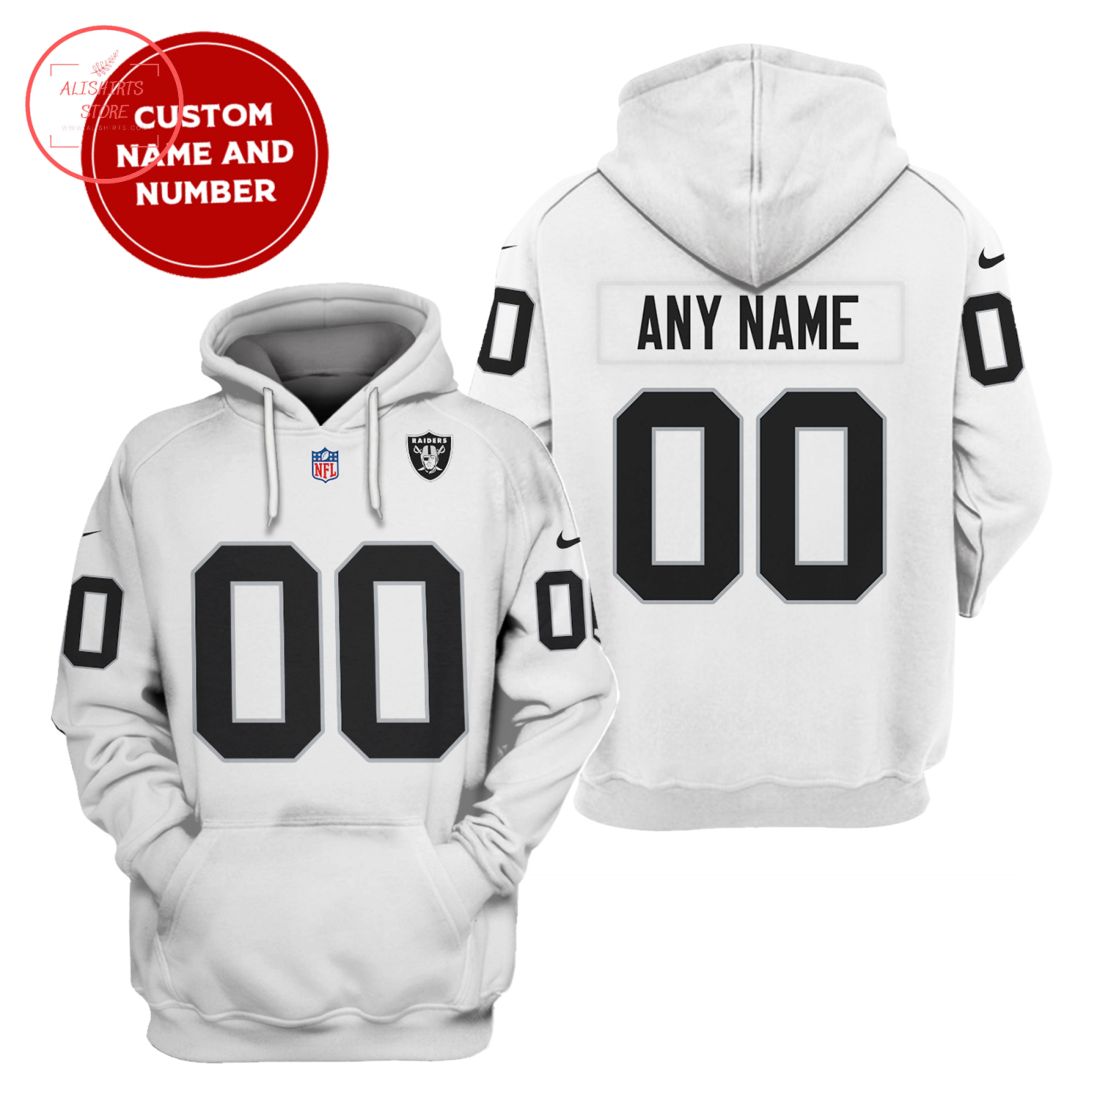 NFL Oakland Raiders Personalized White Shirt and Hoodie